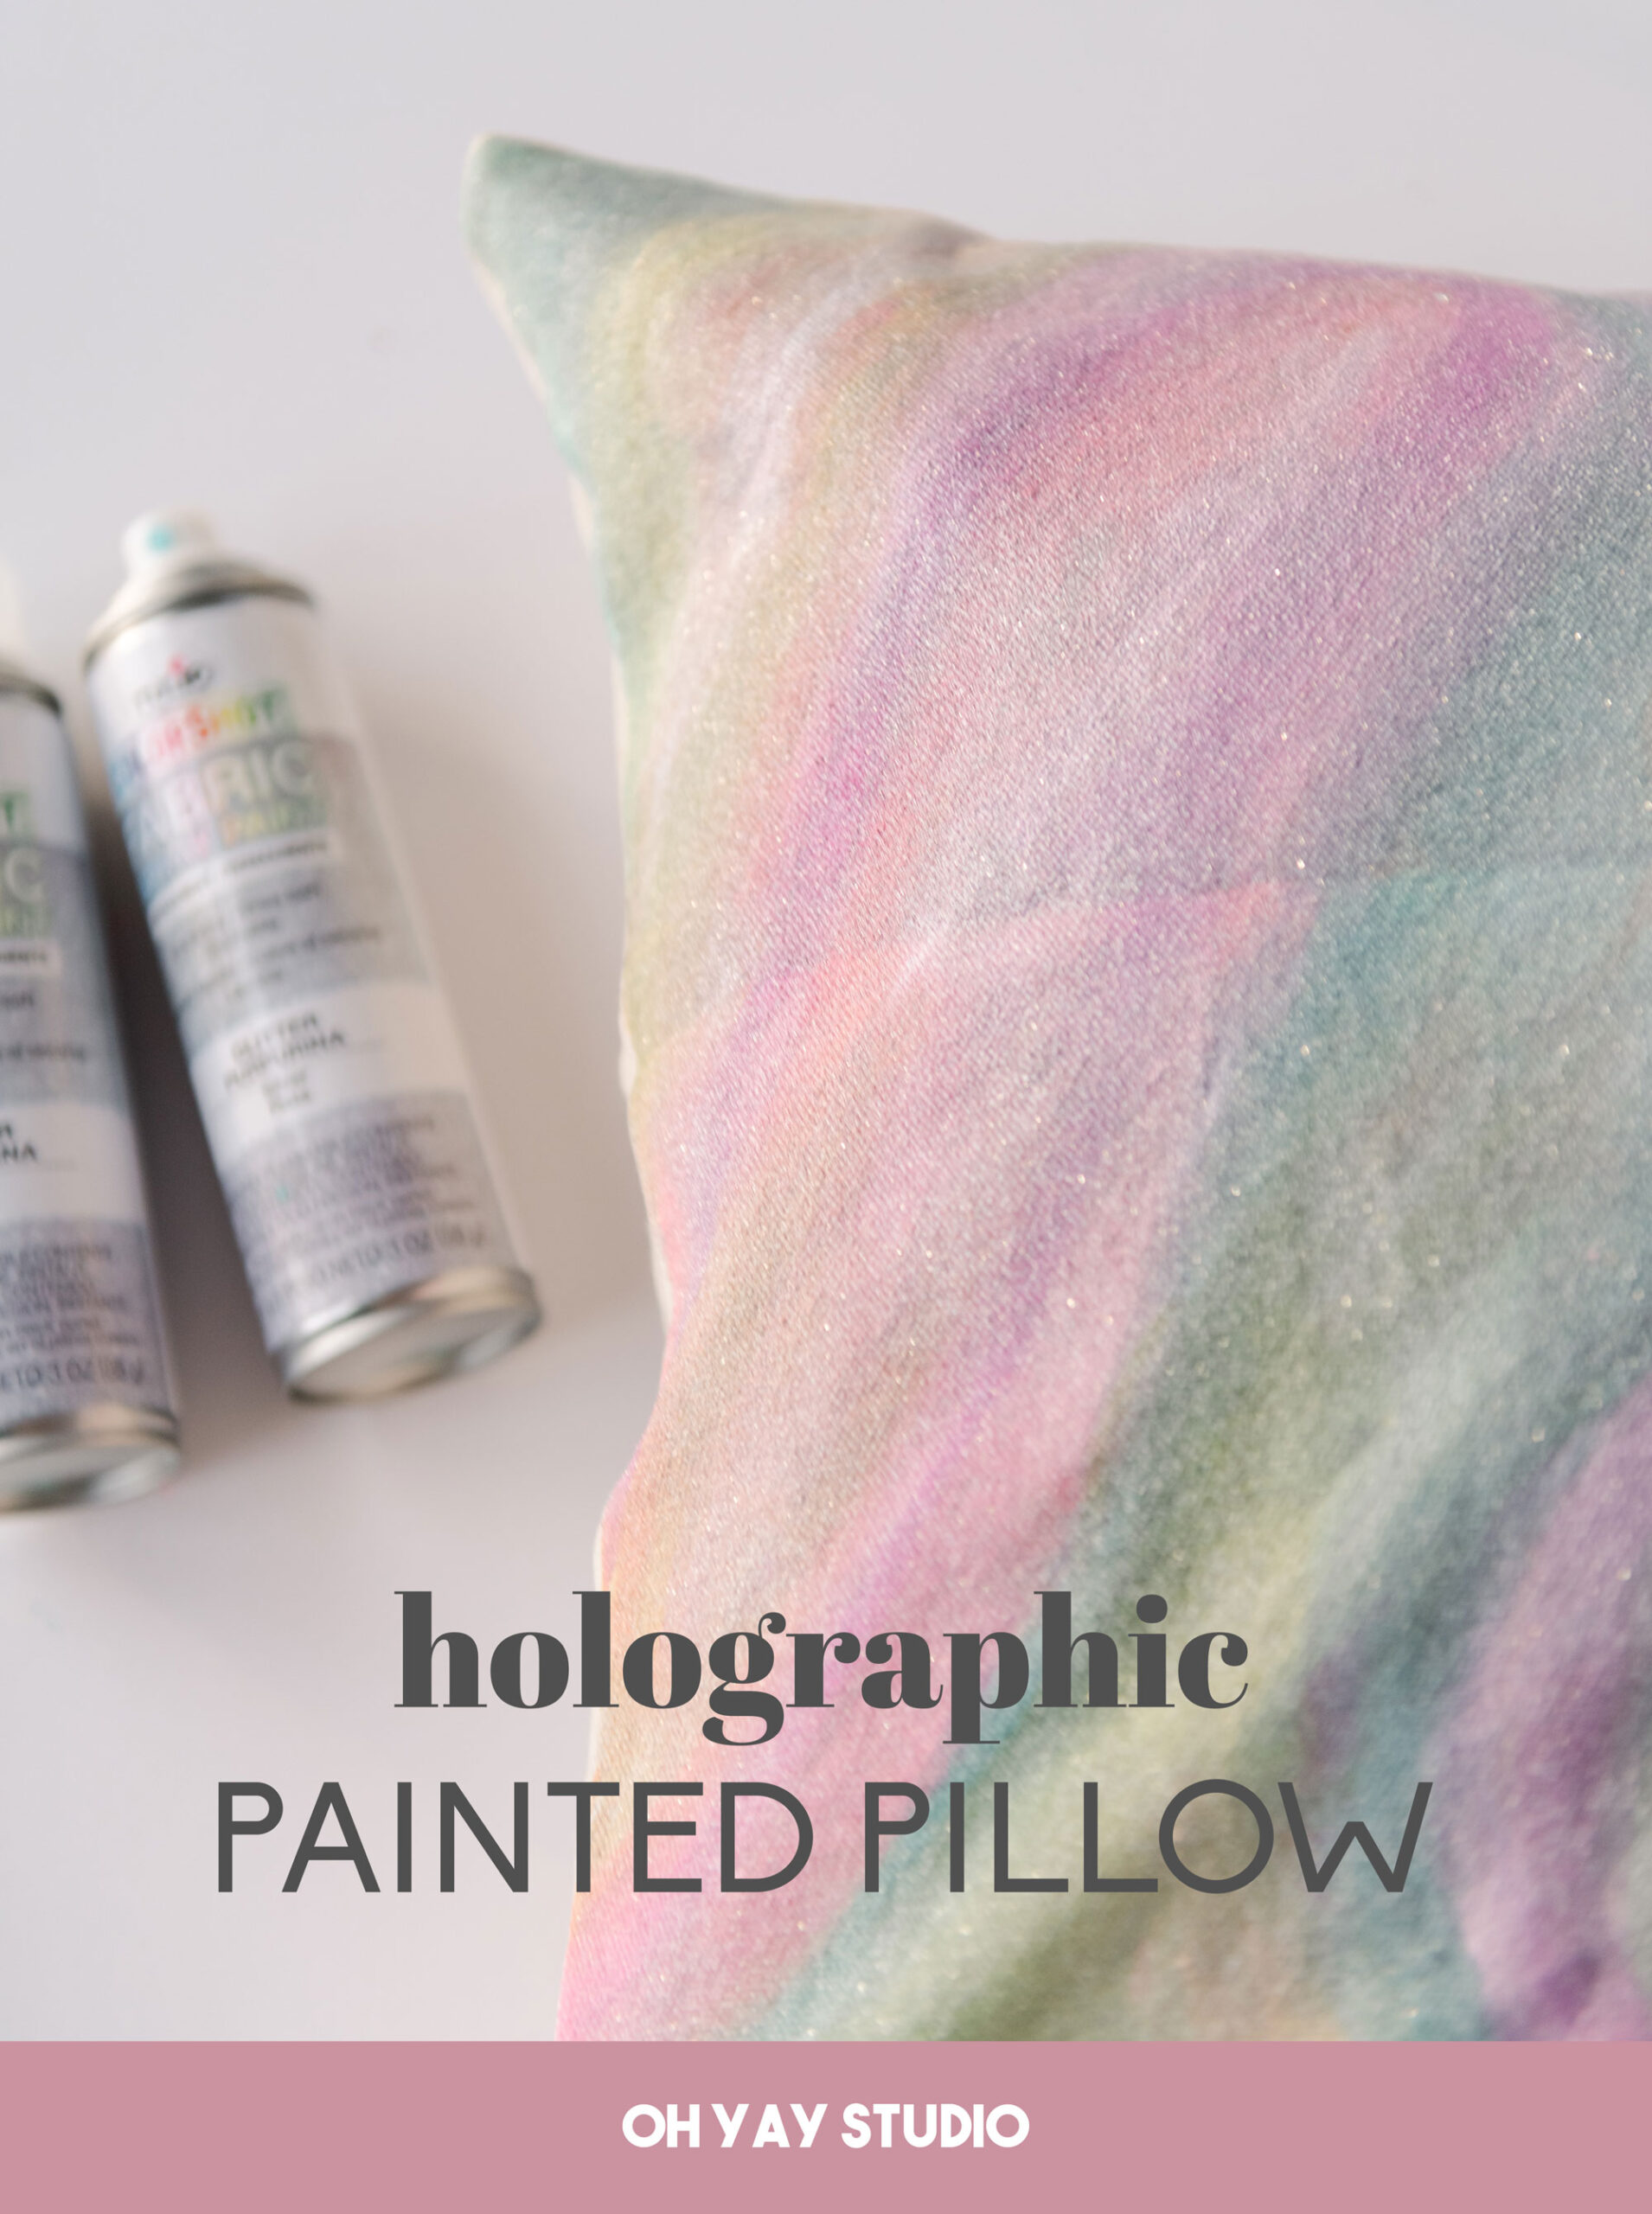 holographic pillow painting, glitter pillow painting, how to paint a pillow, fabric paint, fabric pillow painting